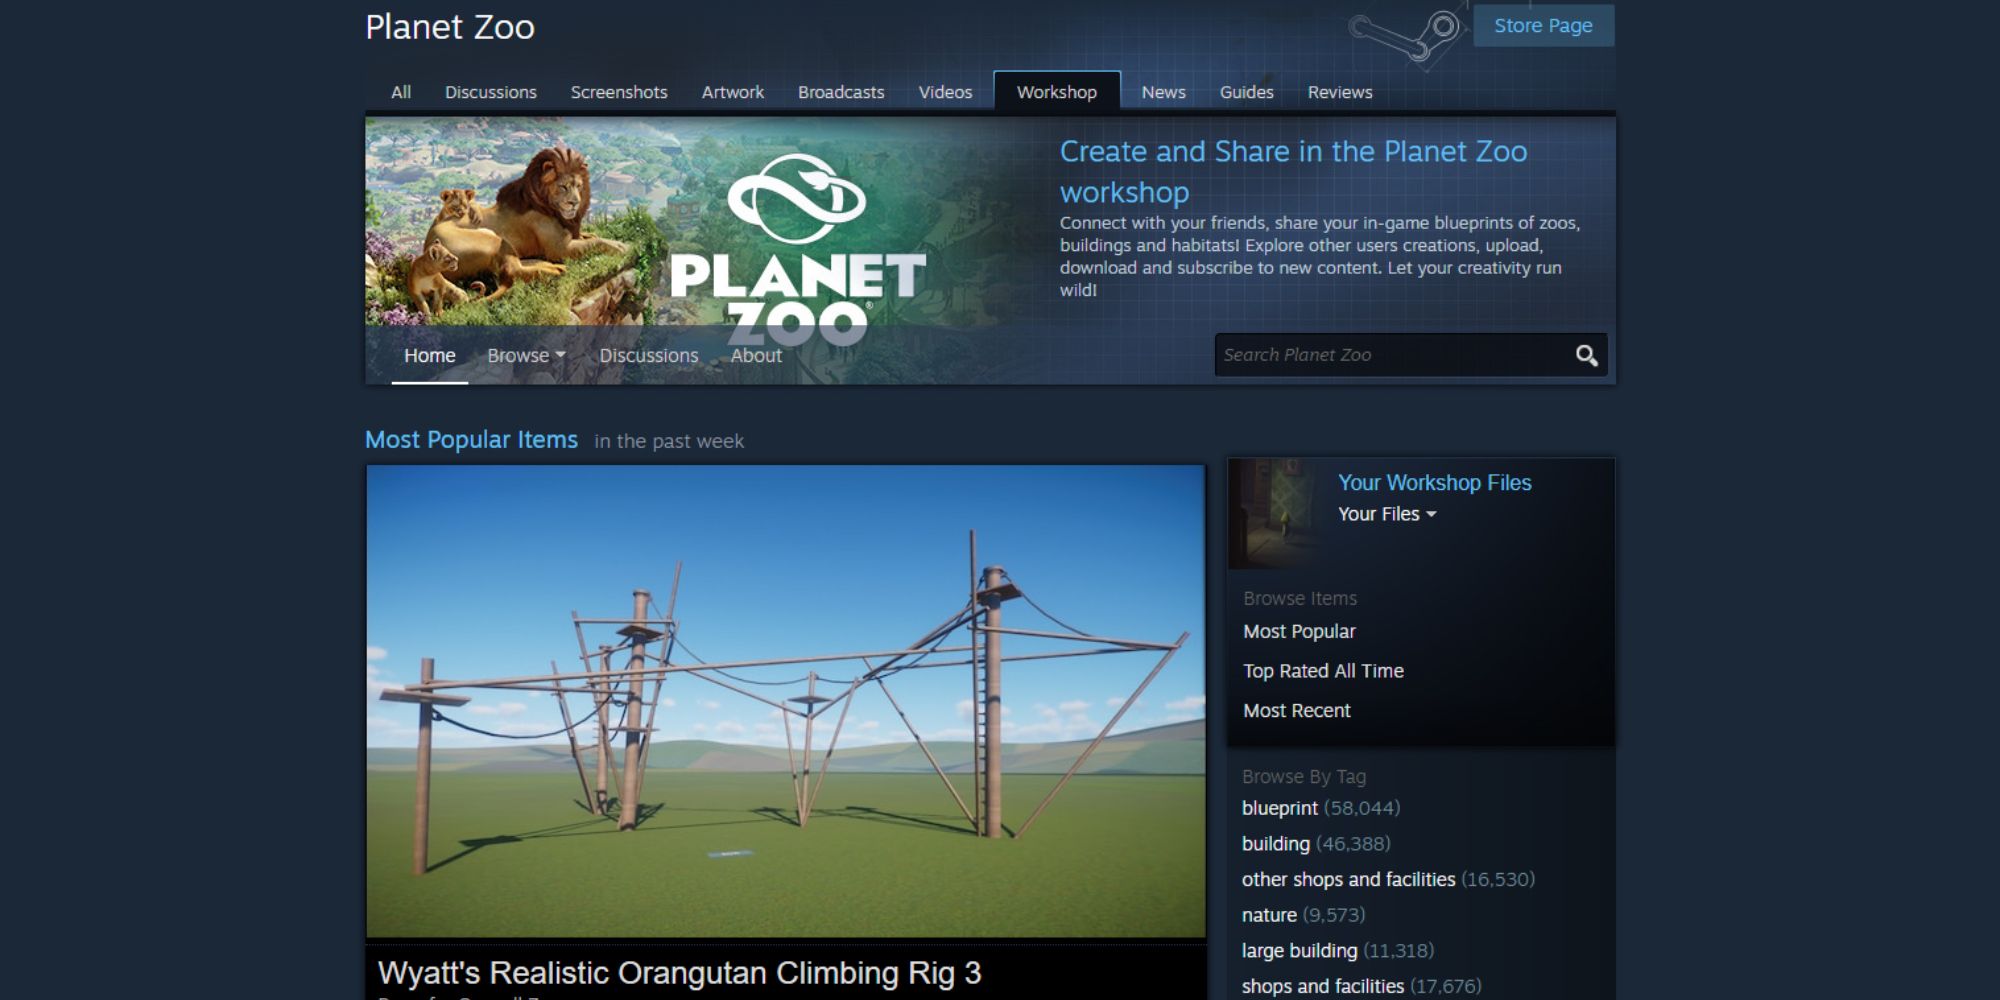 where does steam workshop install mods